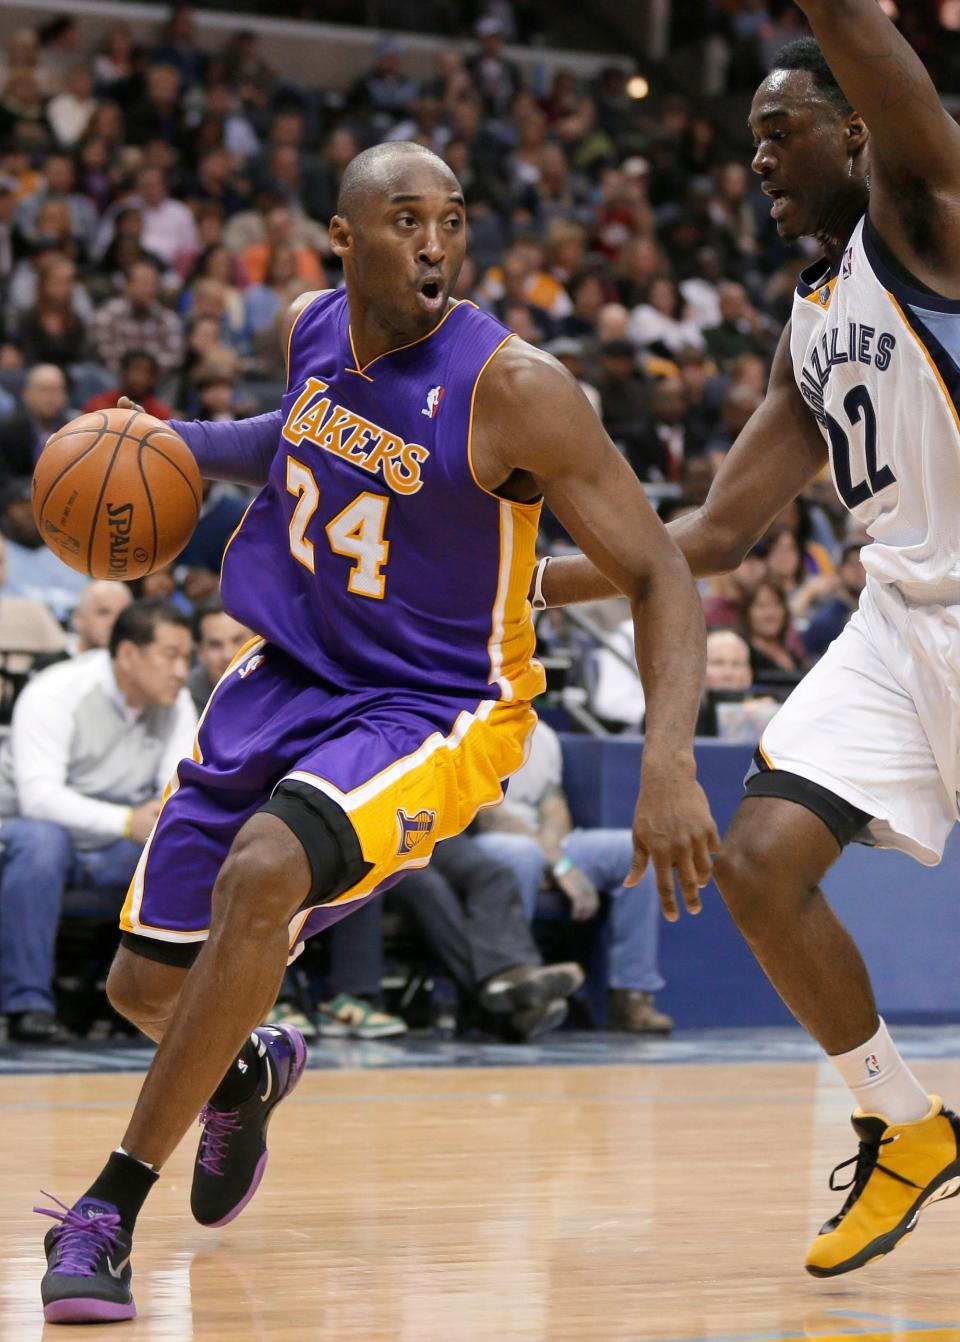 In this Dec. 17, 2013, file photo, Los Angeles Lakers' Kobe Bryant, left, dribbles around Memphis Grizzlies' Jamaal Franklin, a Serrano High School graduate, during the first half of an NBA basketball game in Memphis, Tenn.